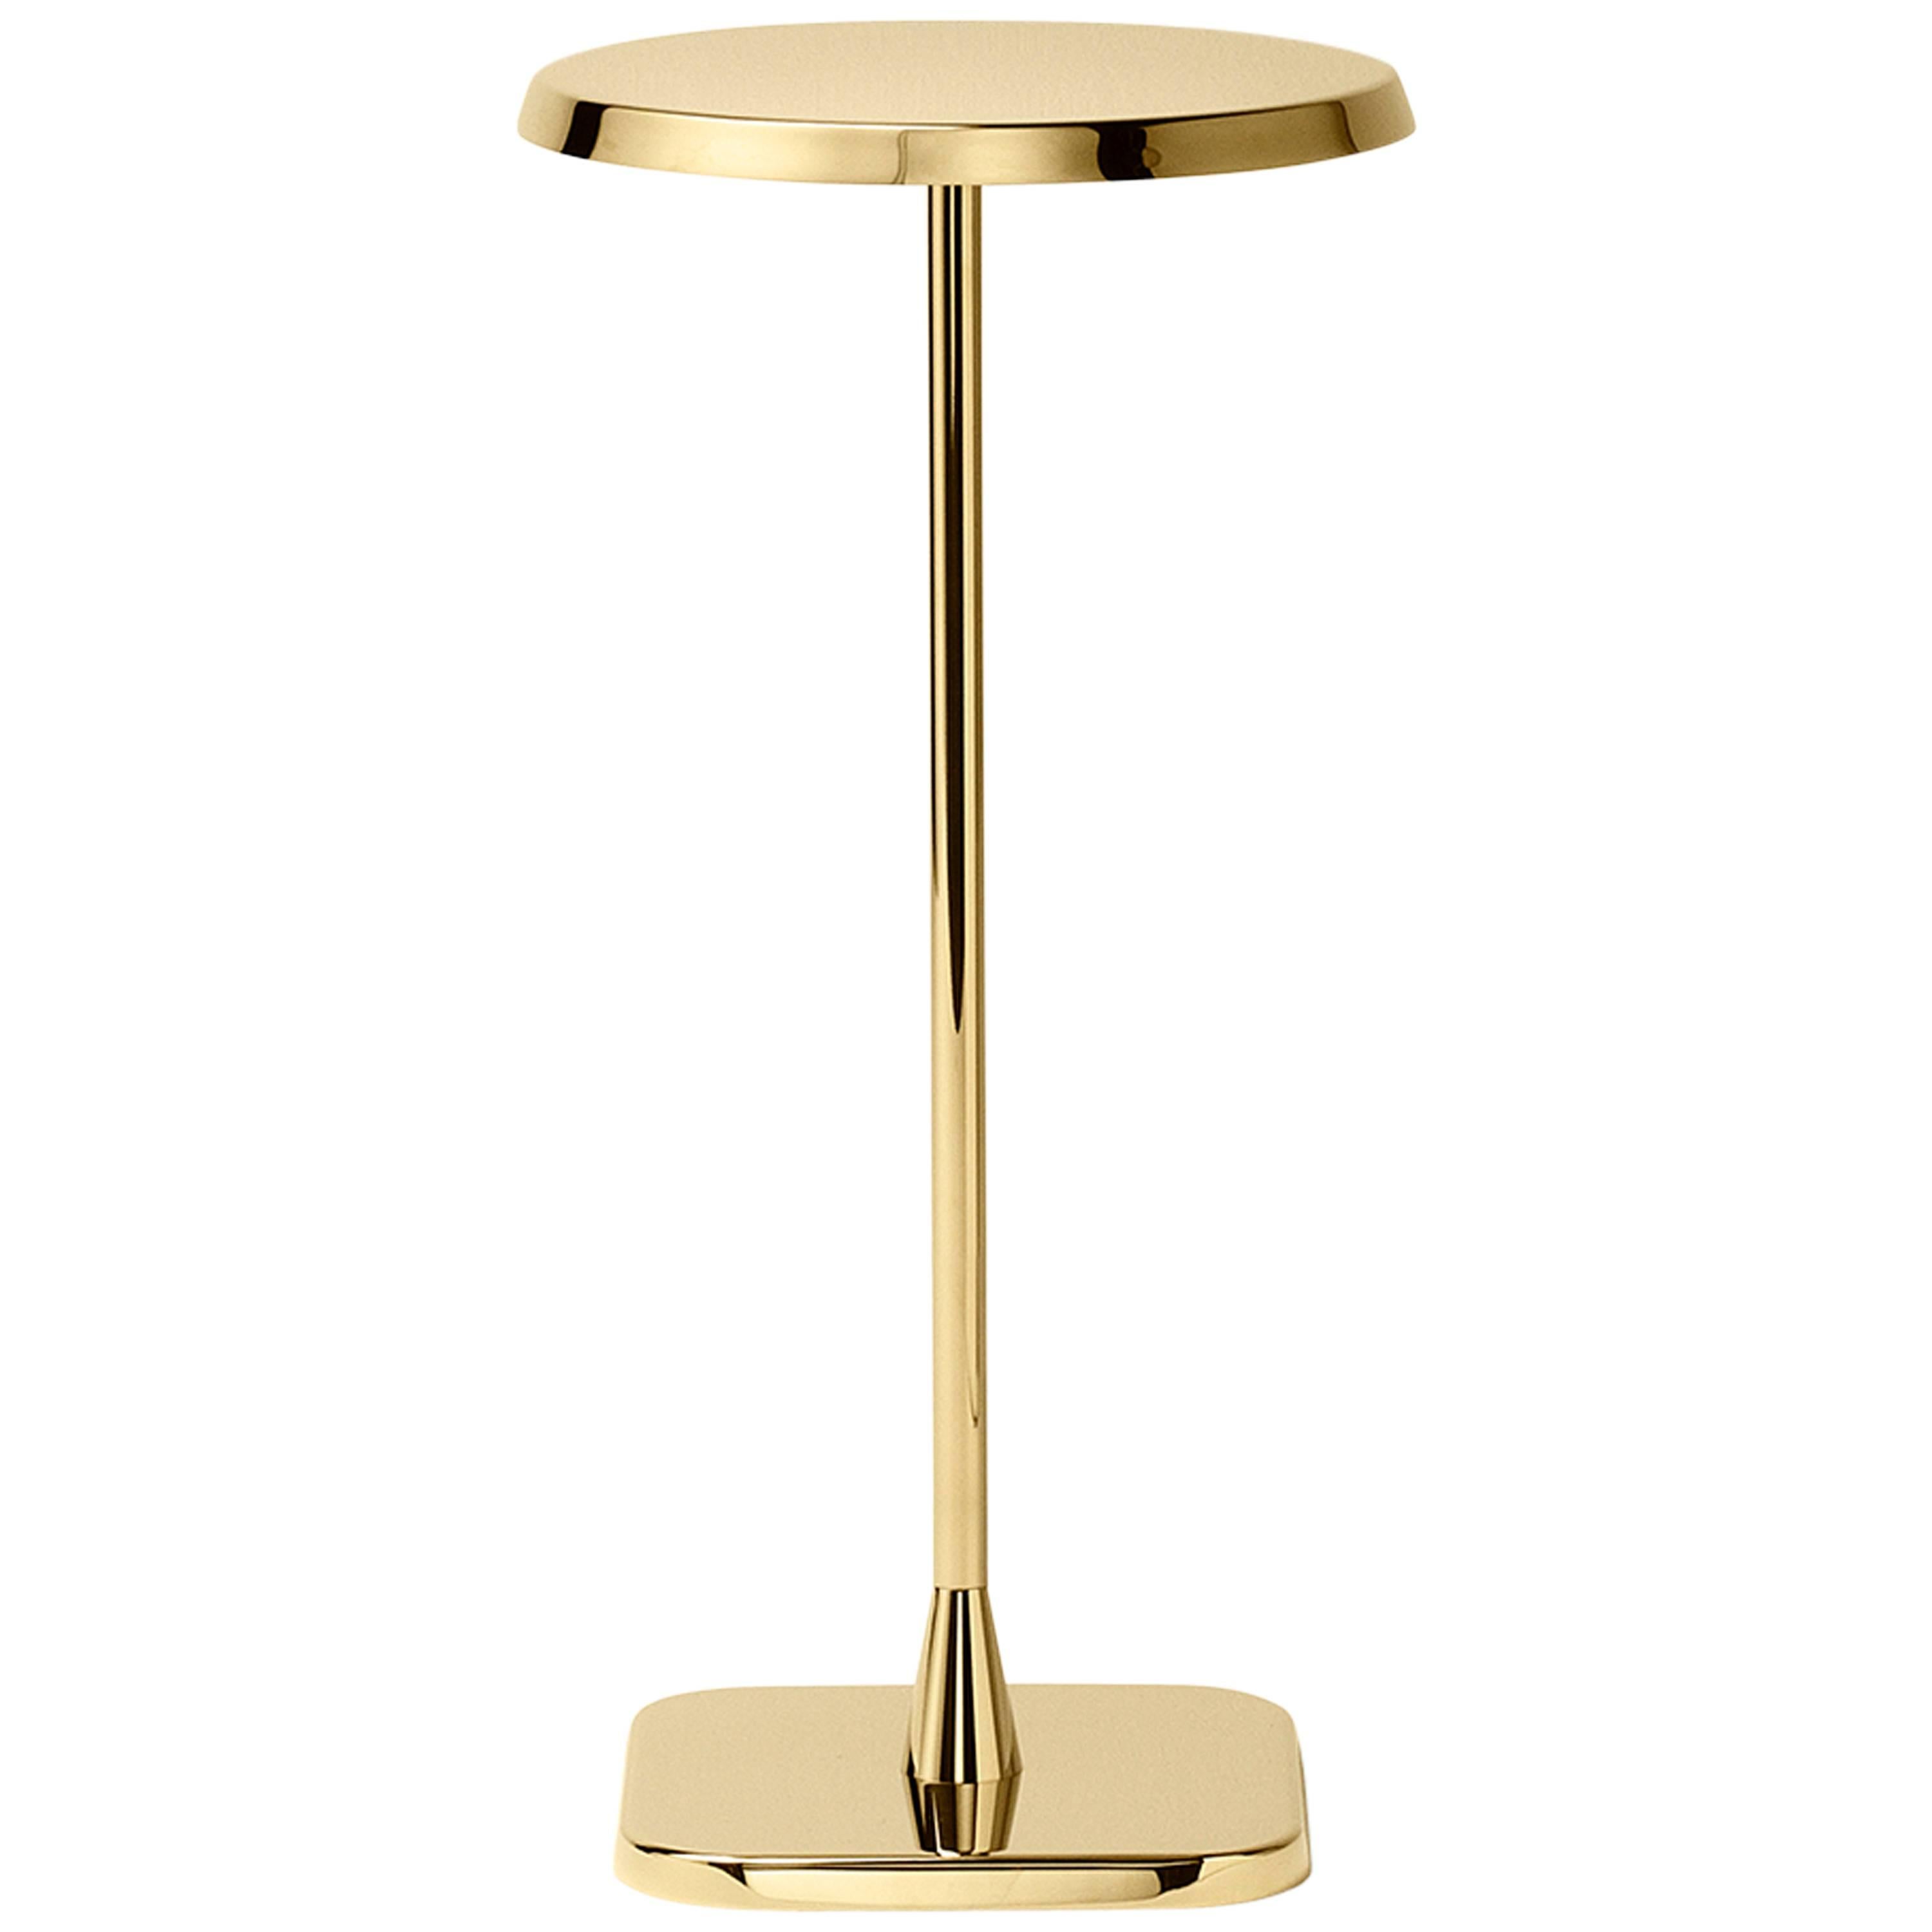 Opera Round Brass Table Designed by Richard Hutten for Ghidini